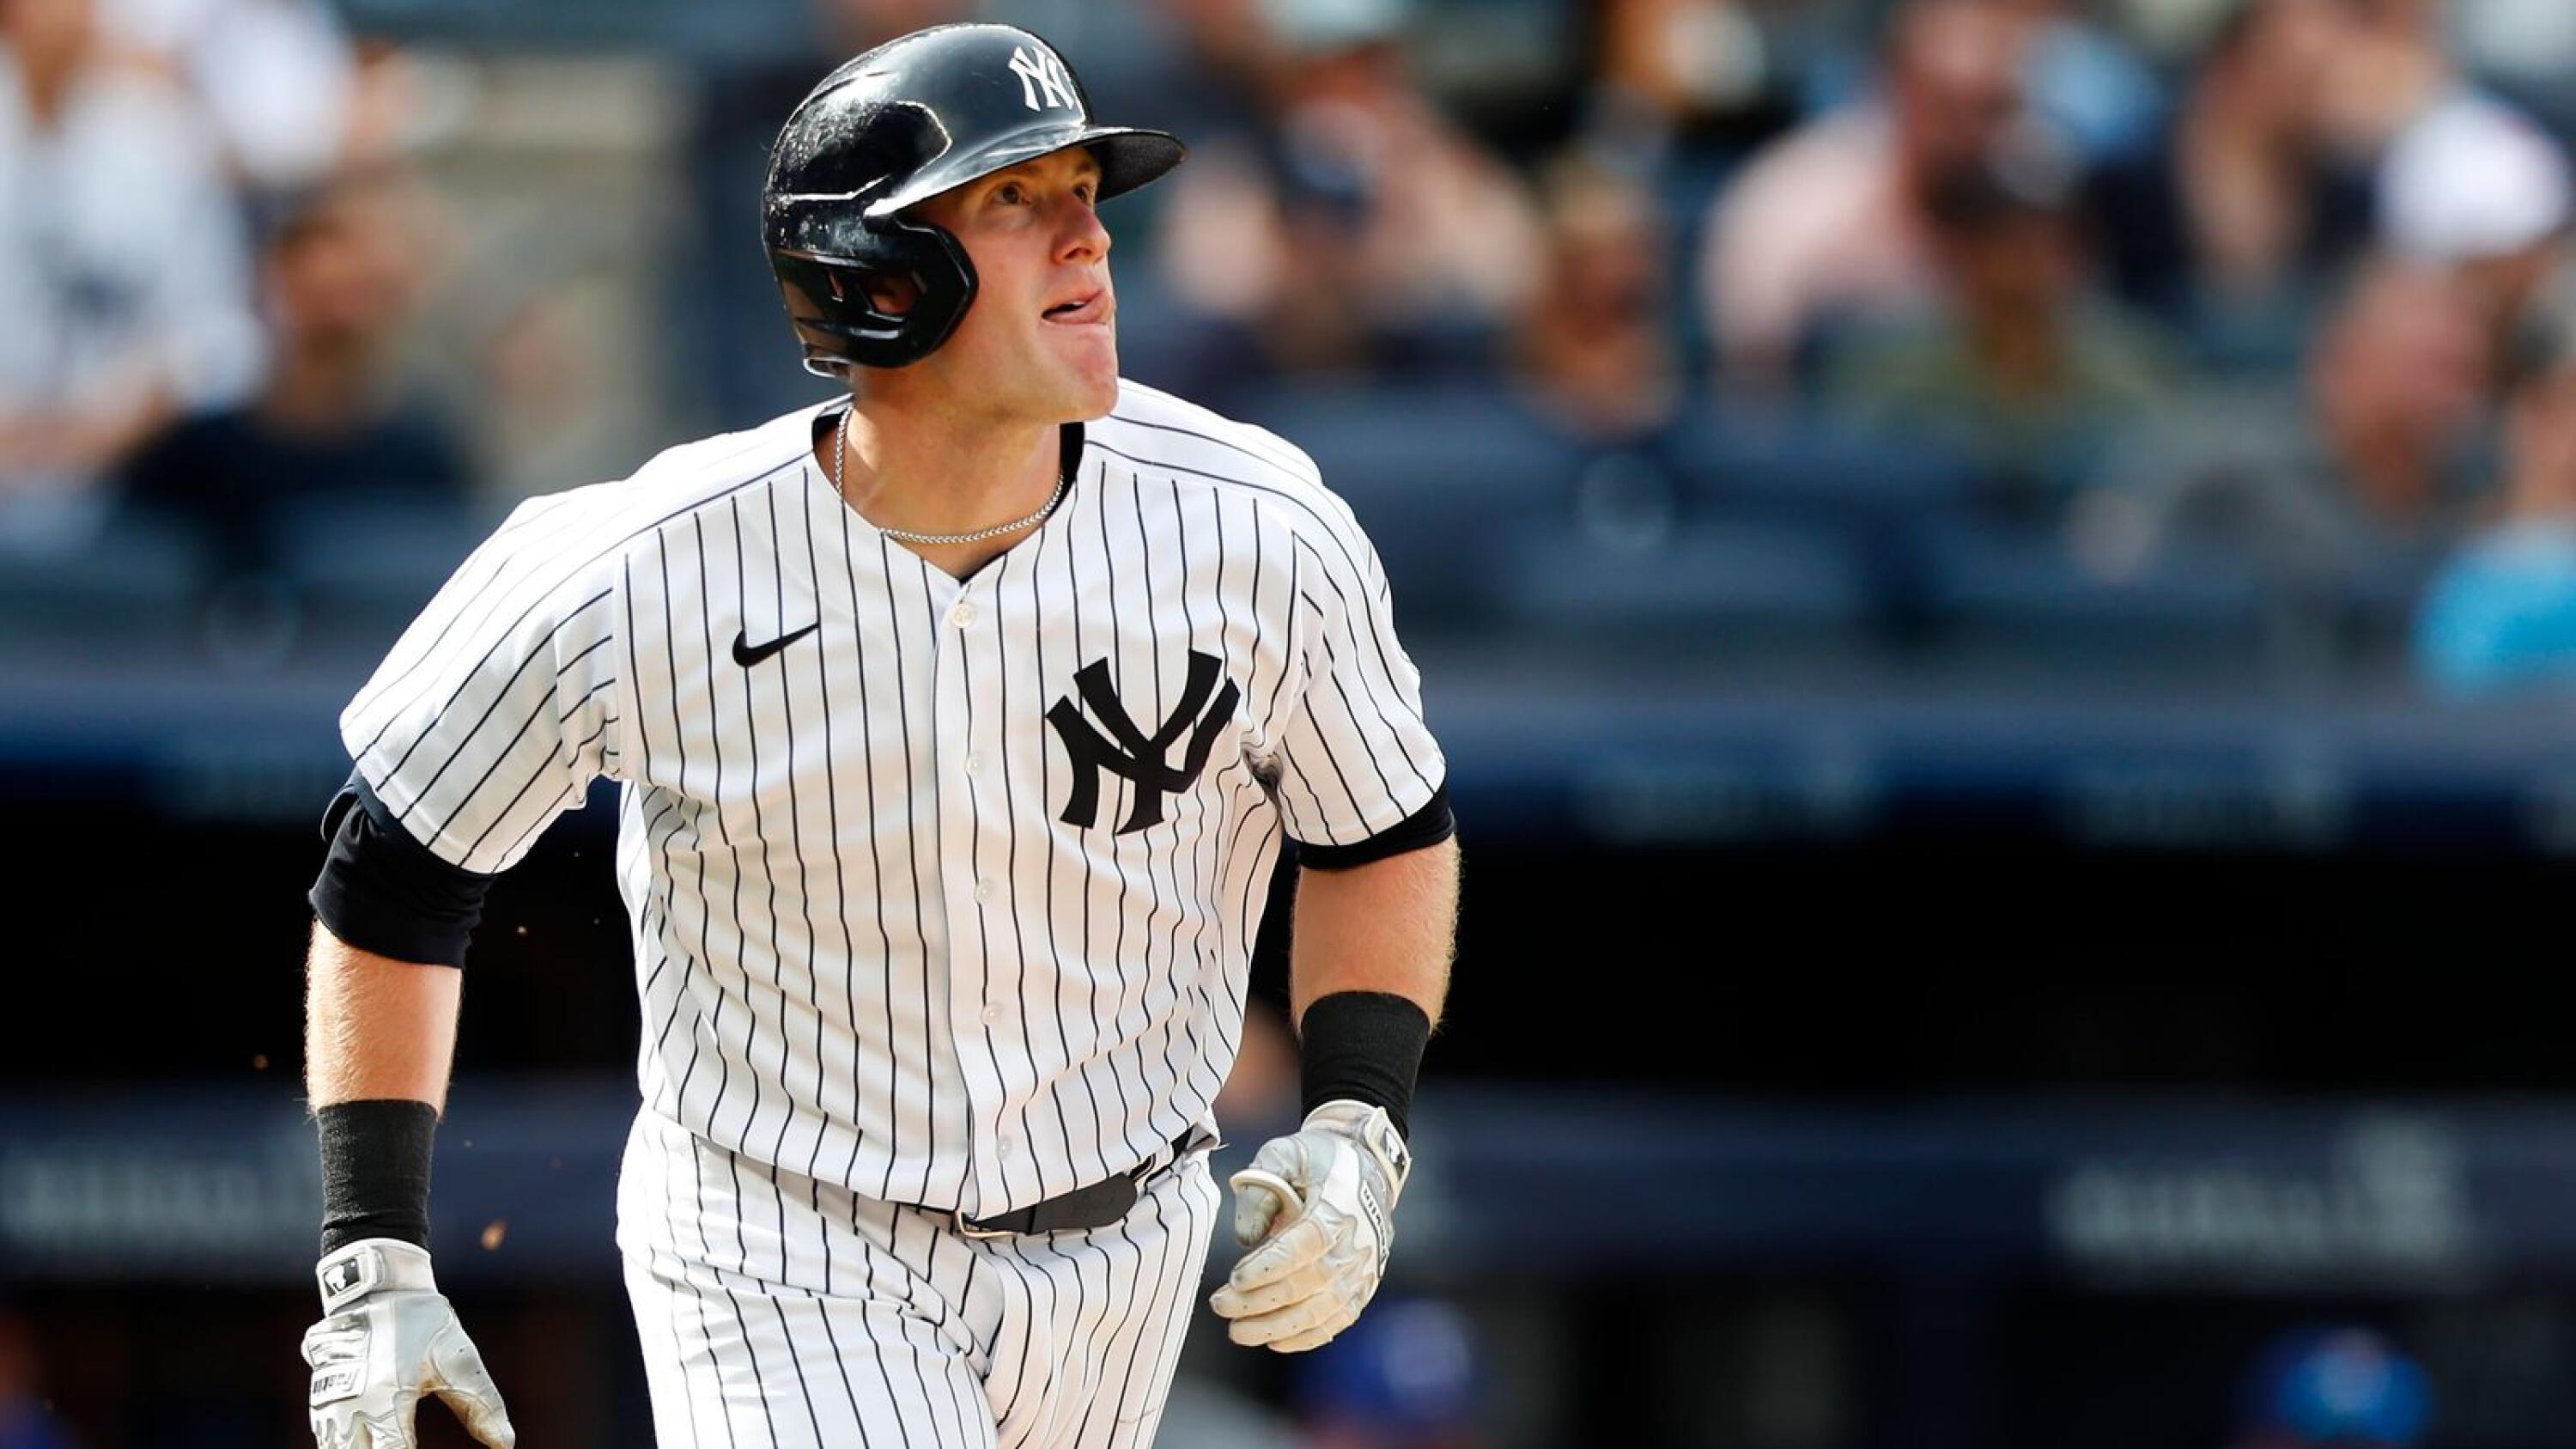 Clay Holmes emerging as Yankees' second closer